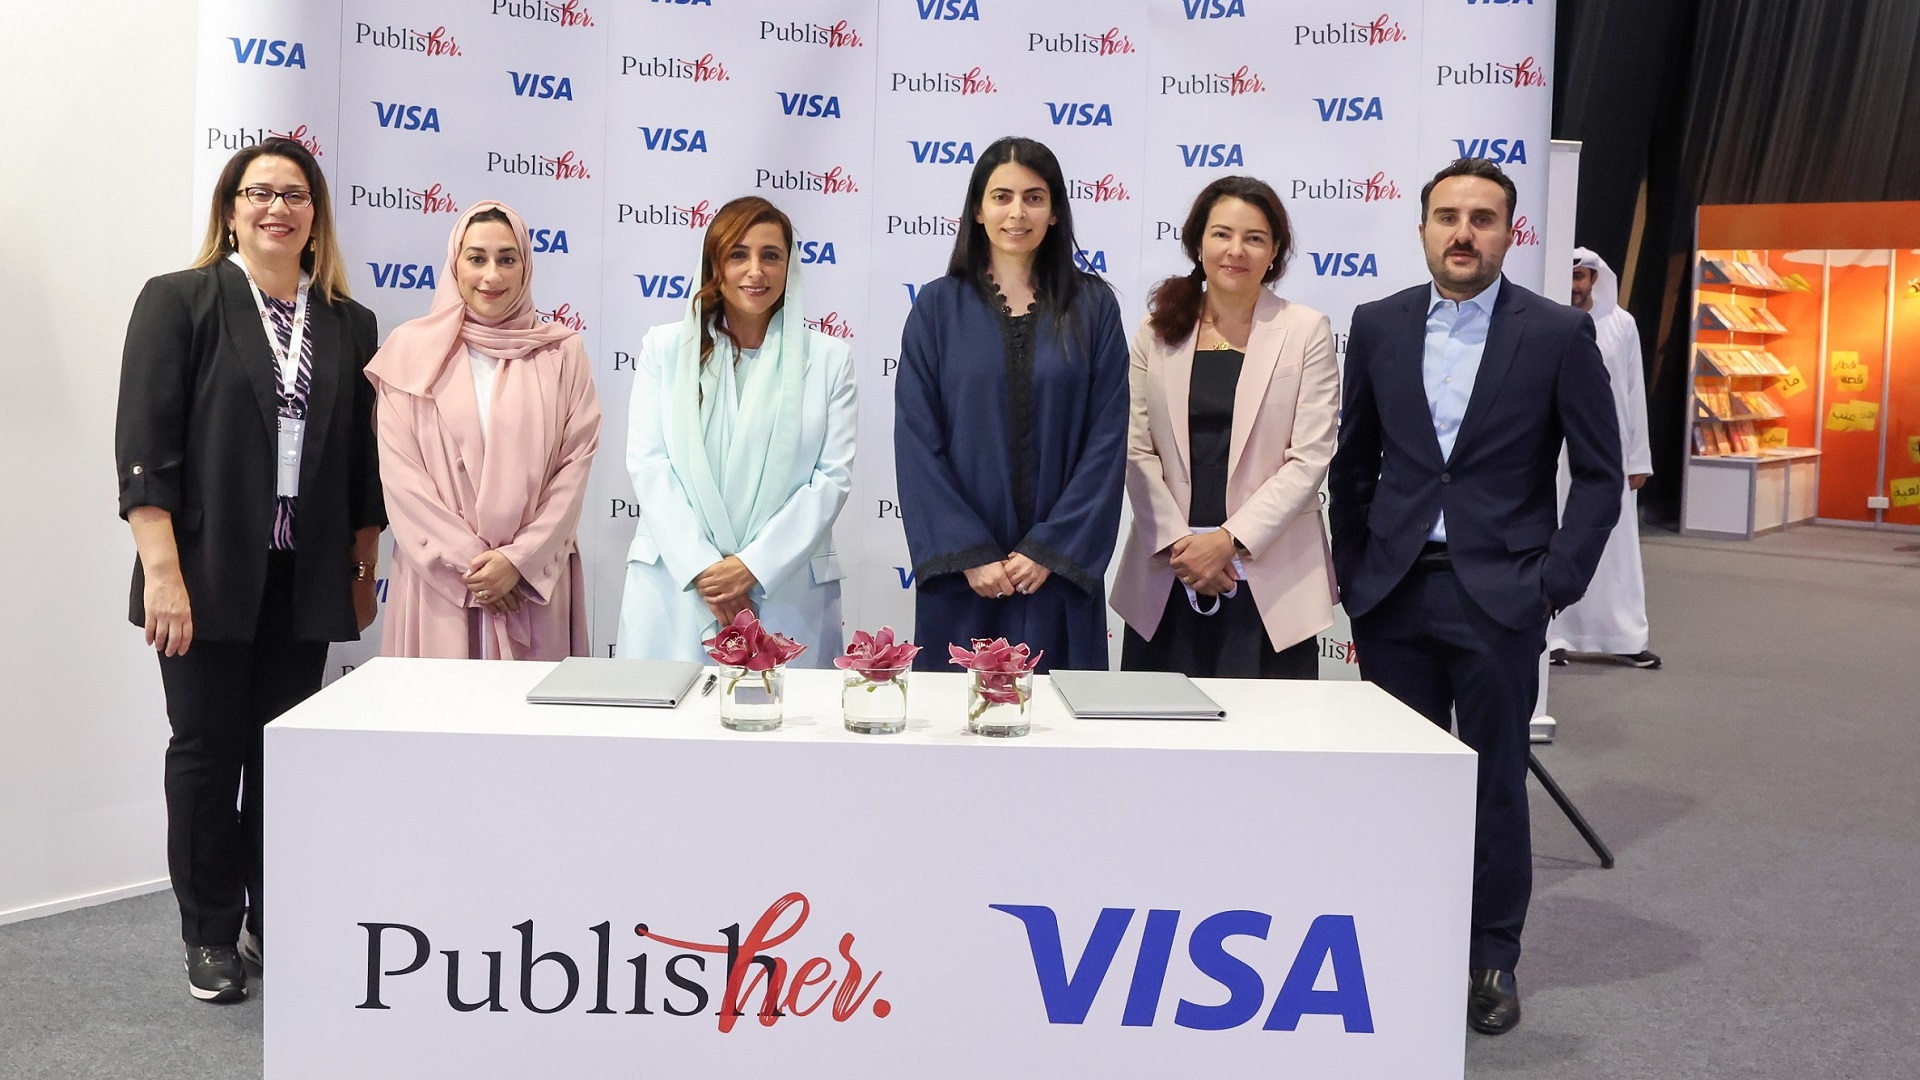 PublisHer, Visa collaborate to support women in publishing